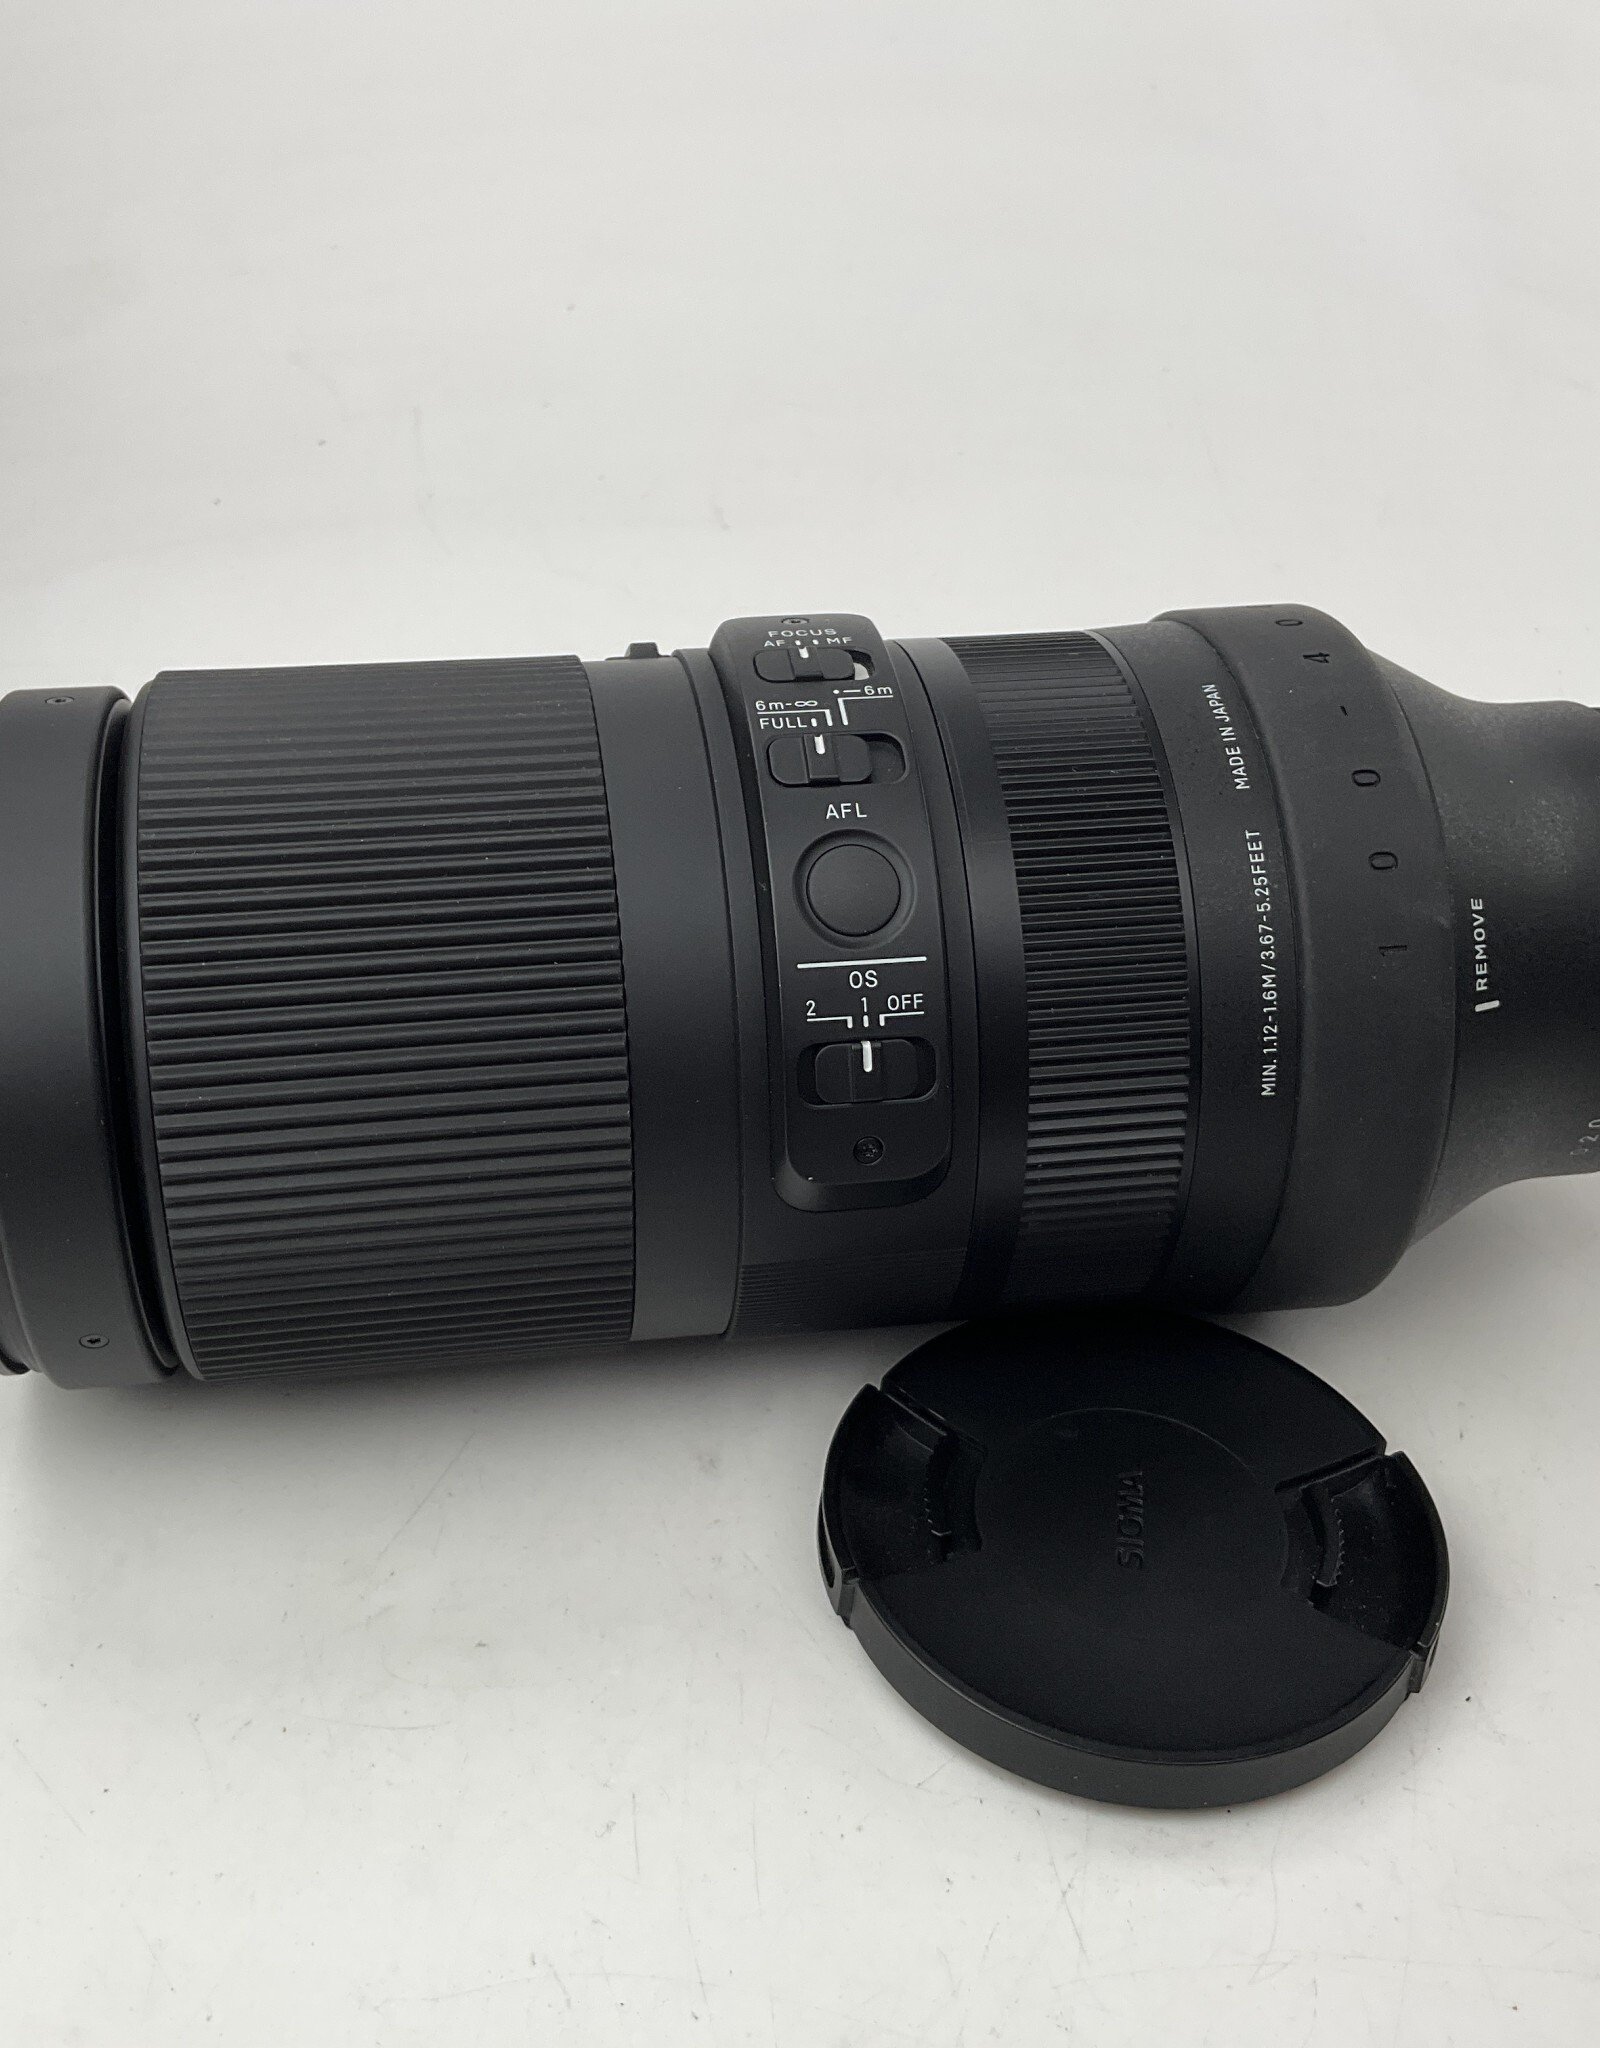 SIGMA Sigma 100-400mm f5-6.3 DG DN Lens in Box for Sony Used EX